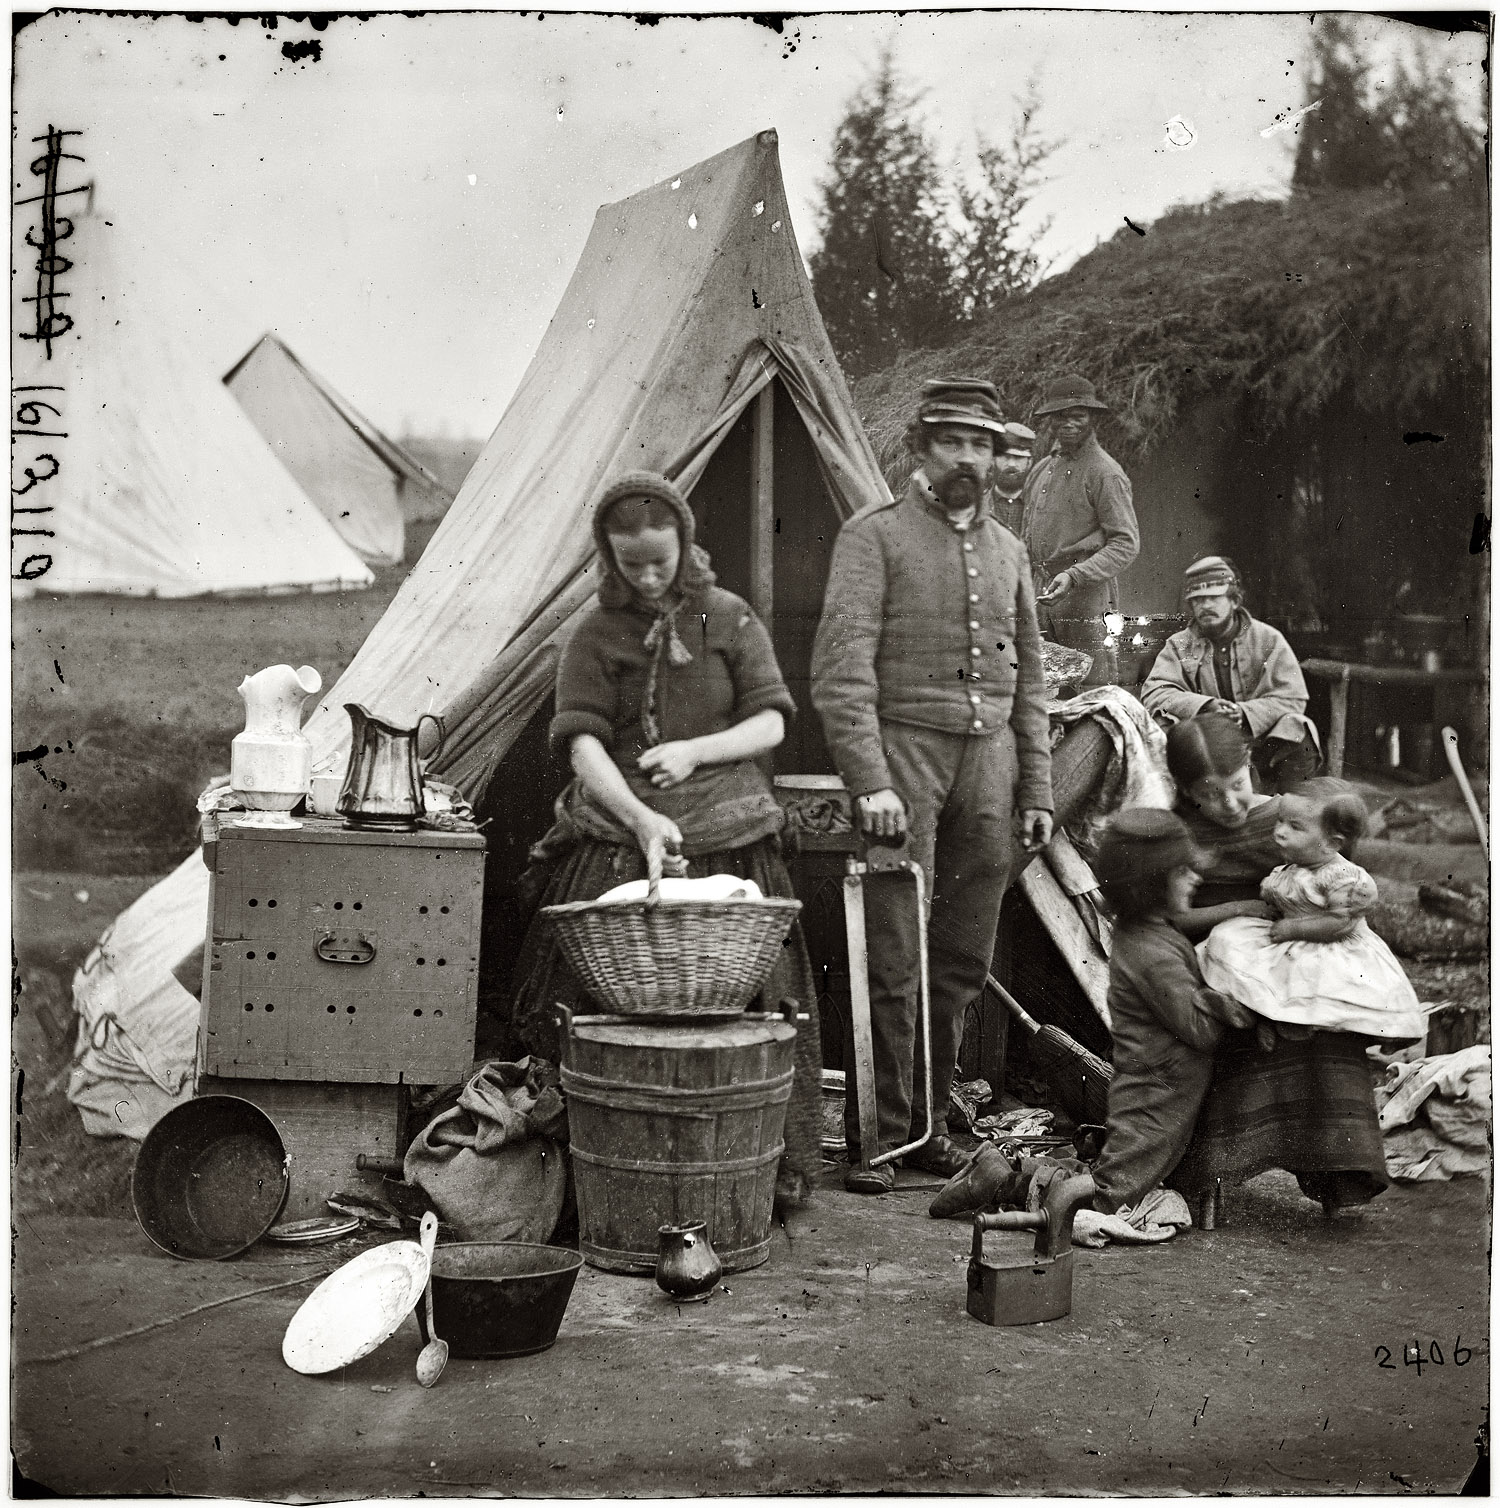 1861. "Washington, District of Columbia. Tent life of the 31st (later, 82nd) Pennsylvania Infantry at Queen's Farm, vicinity of Fort Slocum." View full size. Wet-plate glass negative, left half of stereo pair, photographer unknown.